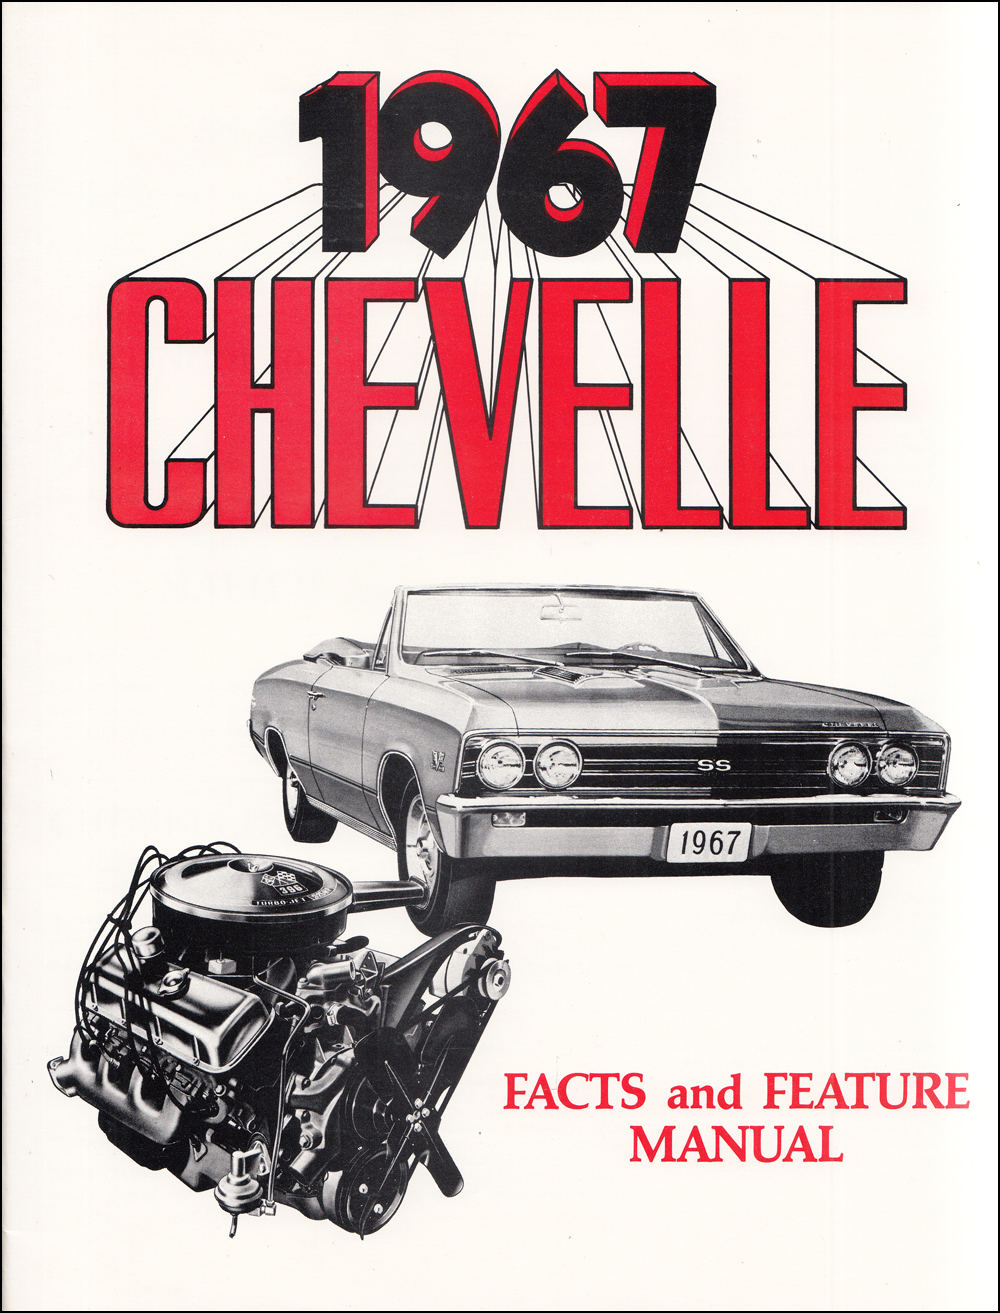 1967 Chevelle Owners Manual mit Umschlag 67 El Camino Malibu Ss Concours Guide 